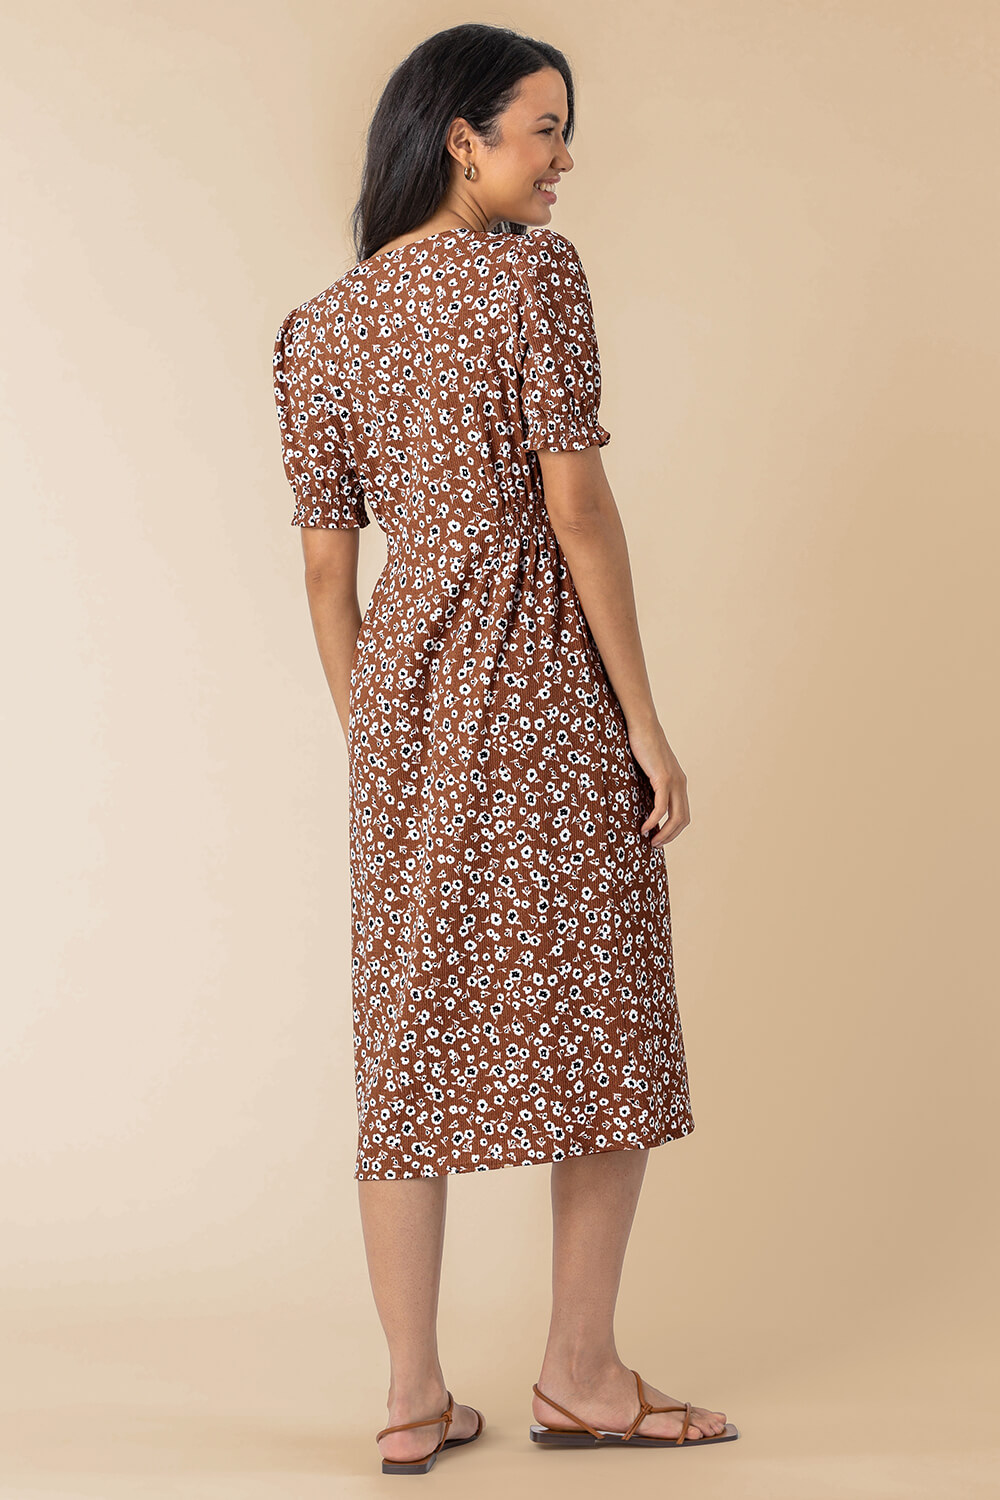 Taupe Floral Print Button Through Dress, Image 2 of 5